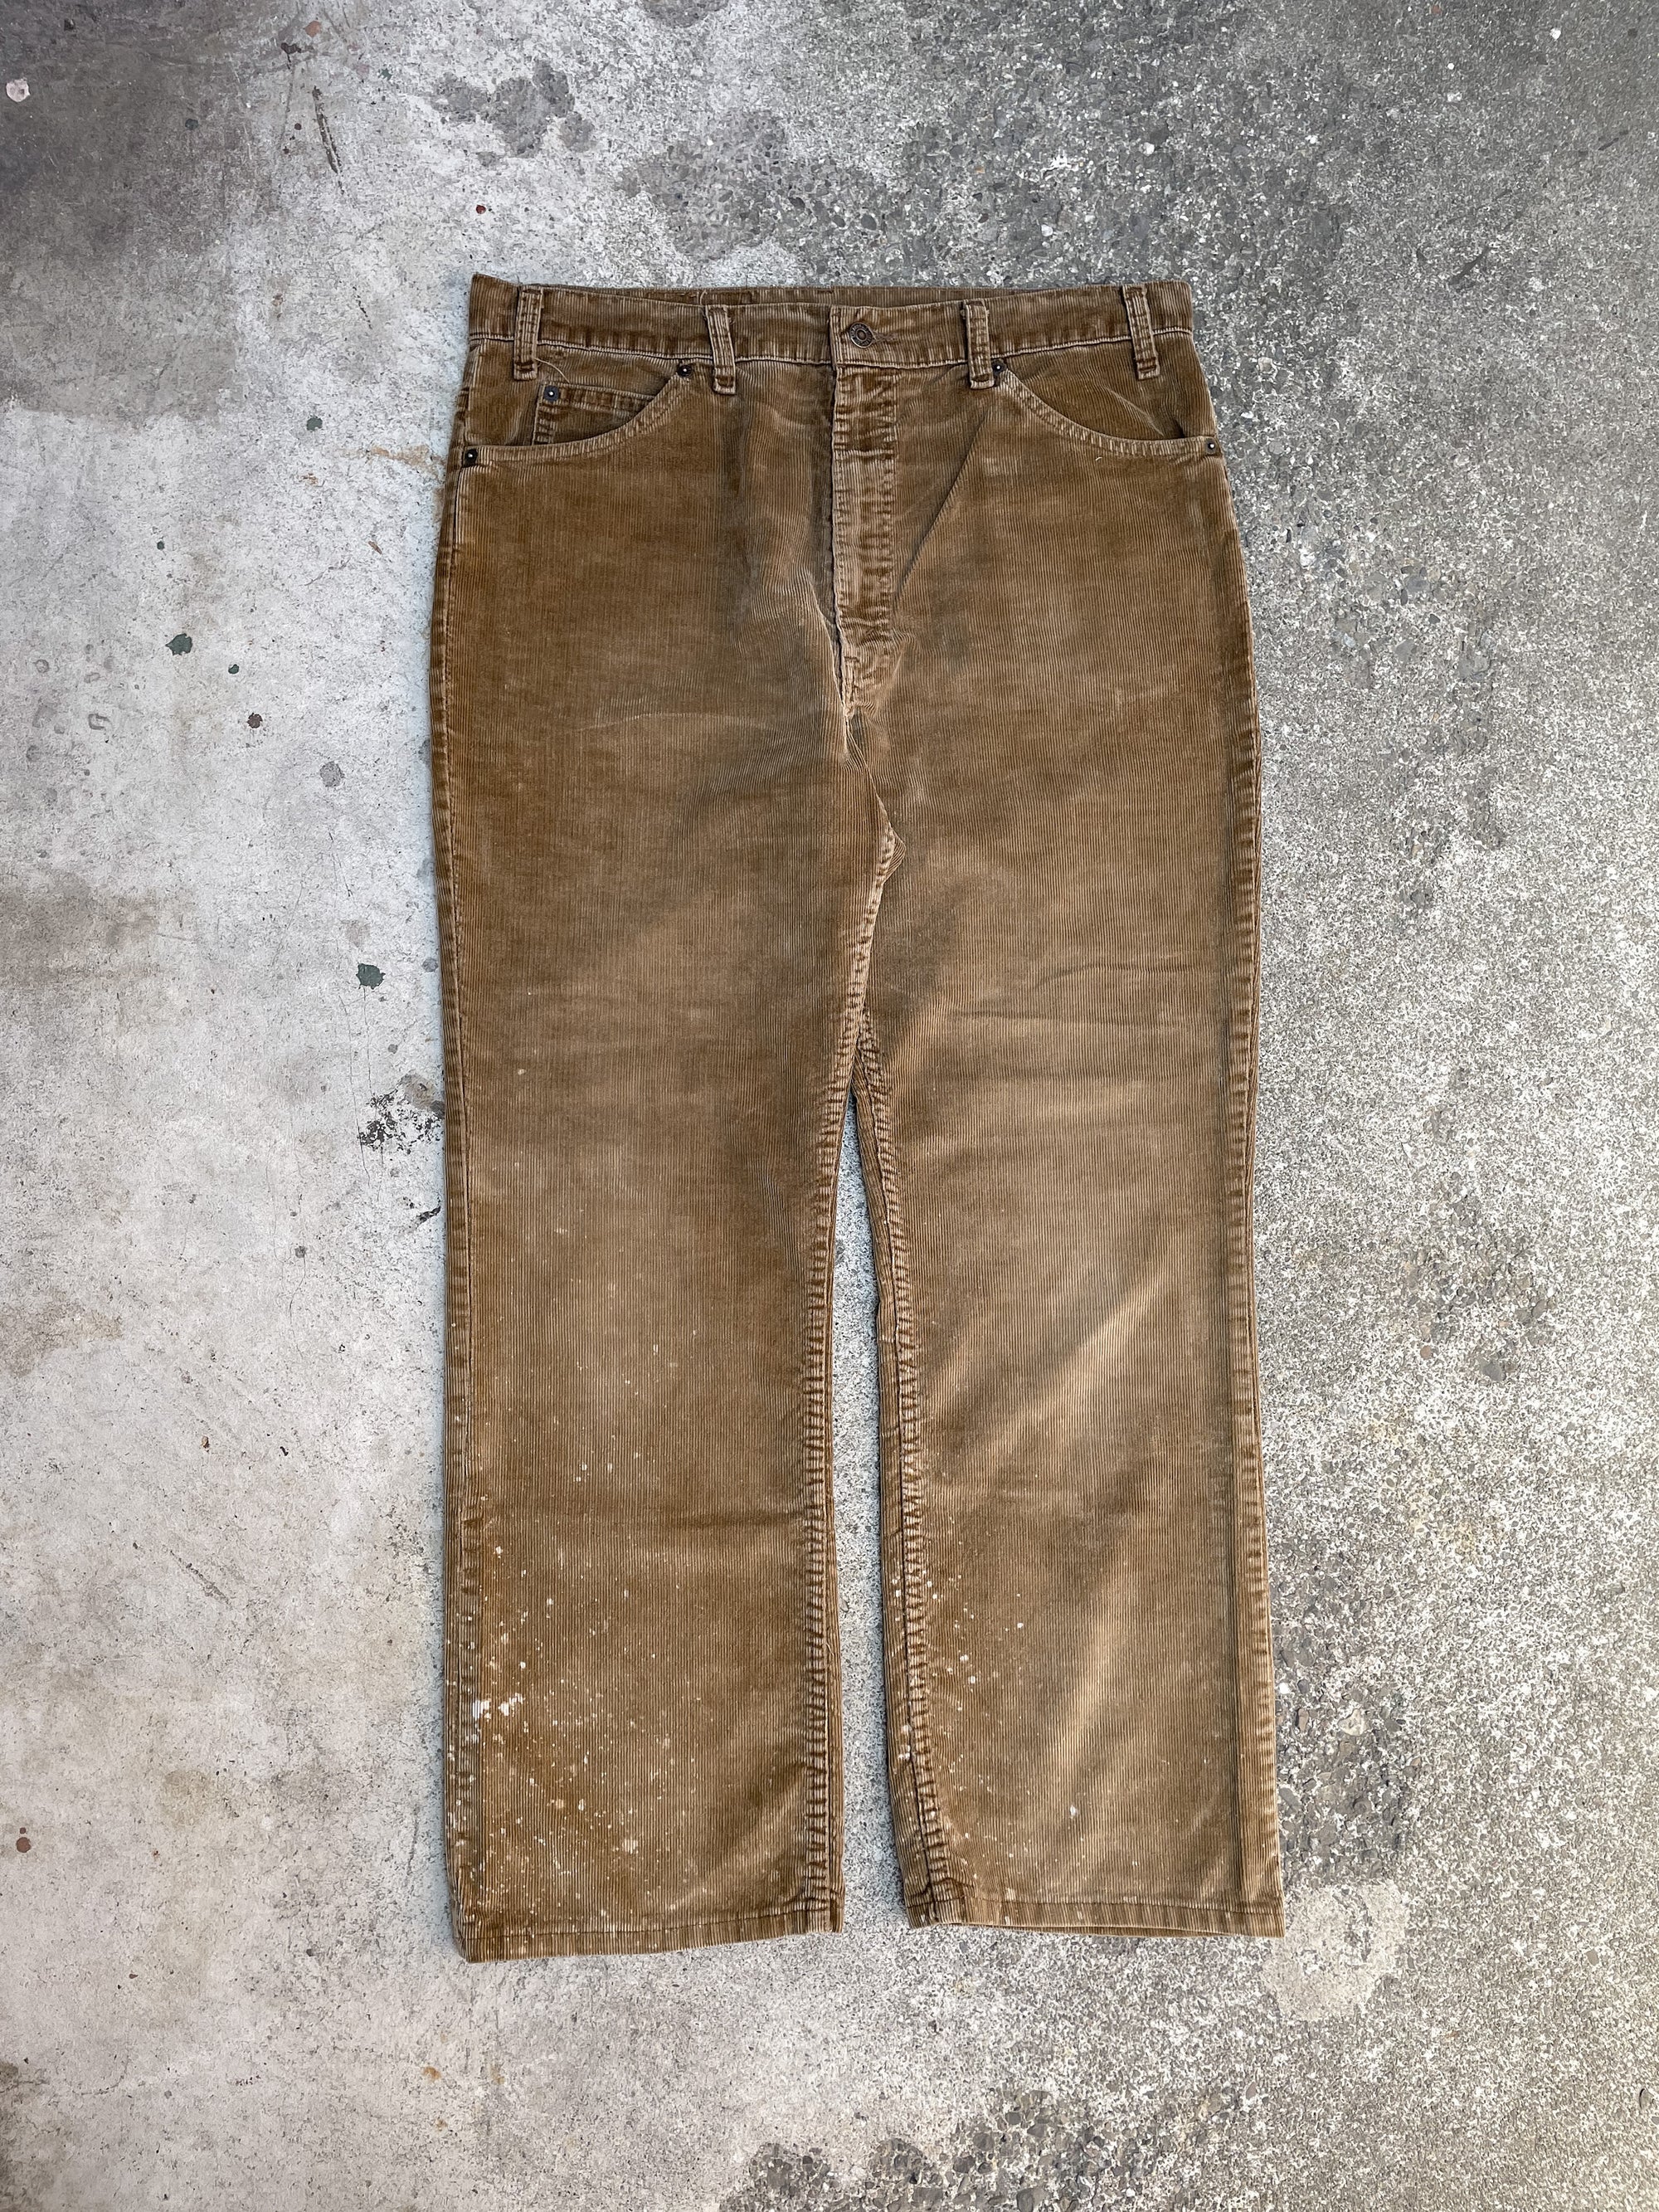 1980s/90s White Tab Levi’s Faded Brown Corduroy 517 (36X28)